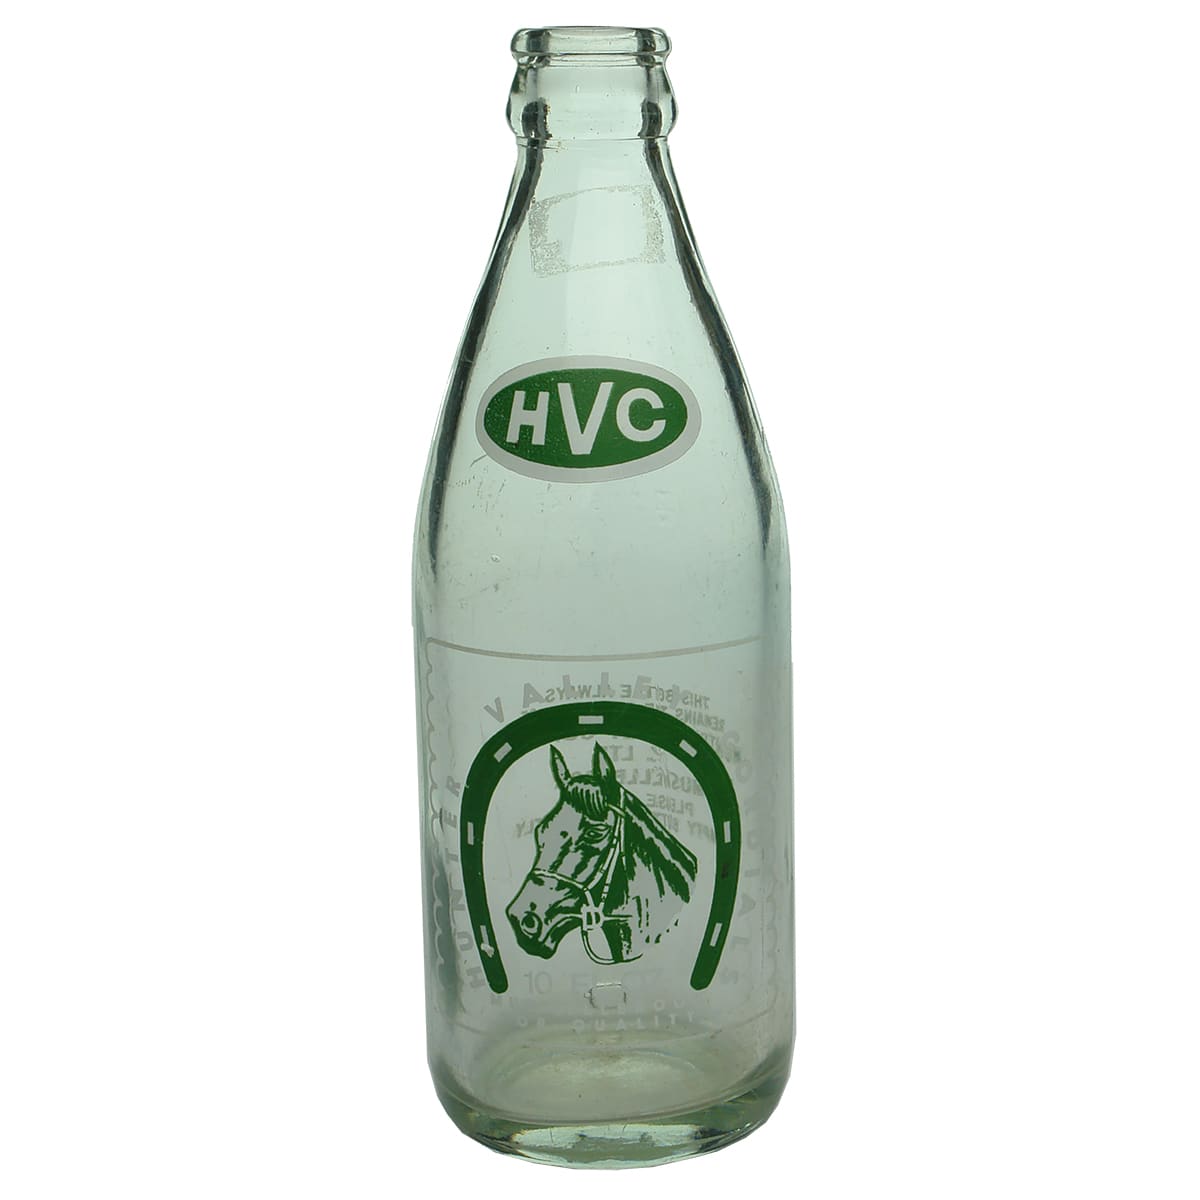 Crown Seal. Hunter Valley Cordials. Green and white print. 10 oz. (New South Wales)